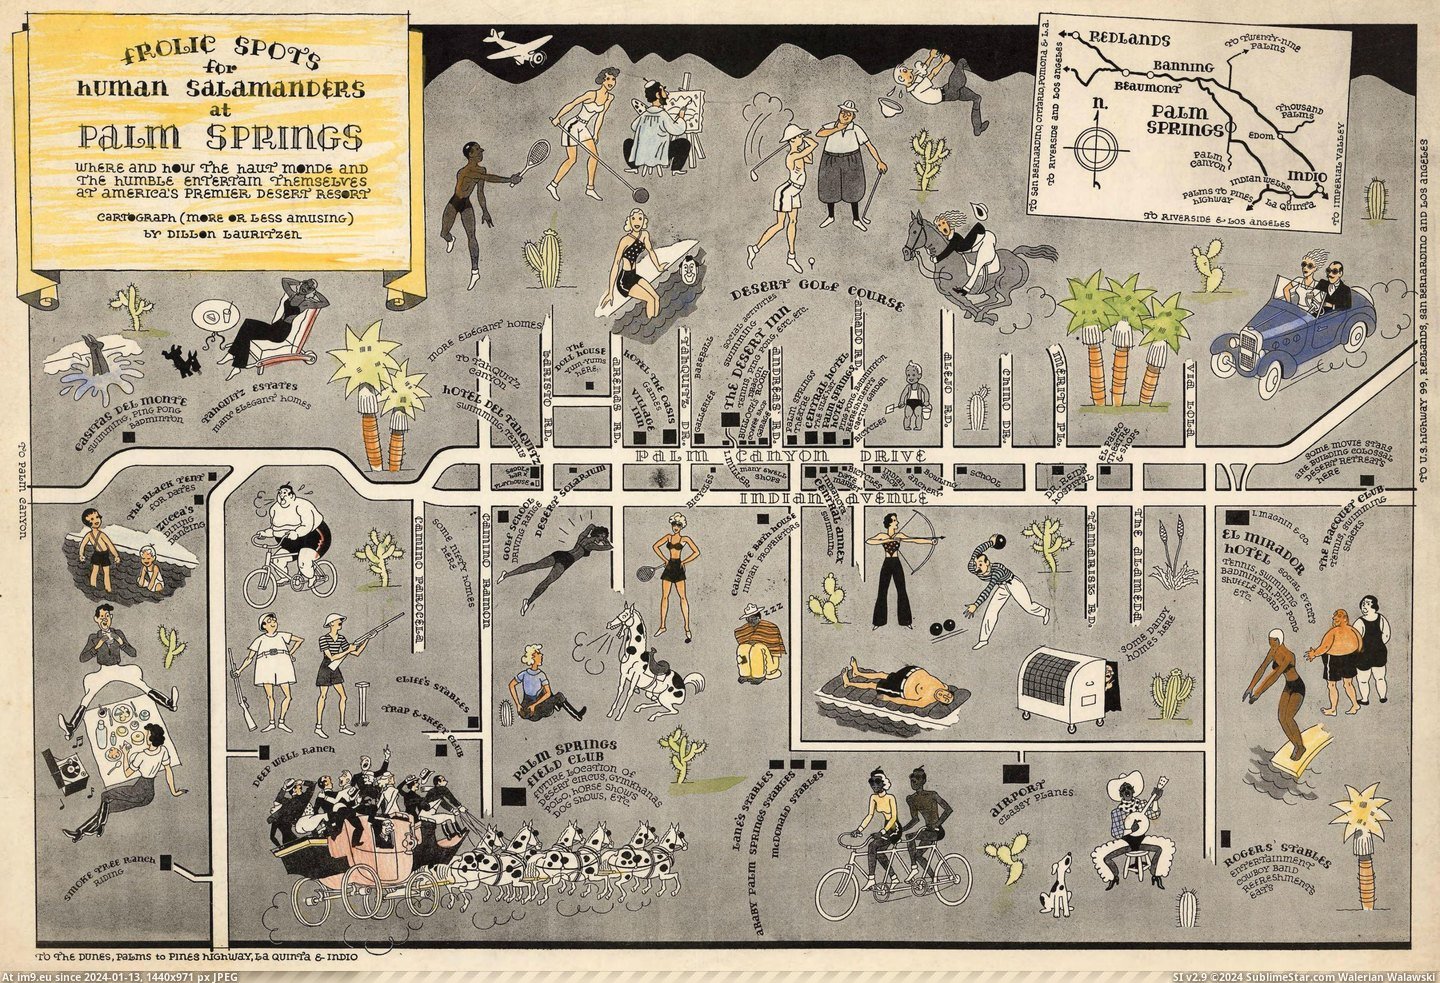 #Art #Map #Palm #Spots #Fabulous #Human #Springs [Mapporn] Frolic spots for Human Salamanders at Palm Springs, 1933 - fabulous Art Deco pictorial map. [3240x2196] Pic. (Image of album My r/MAPS favs))